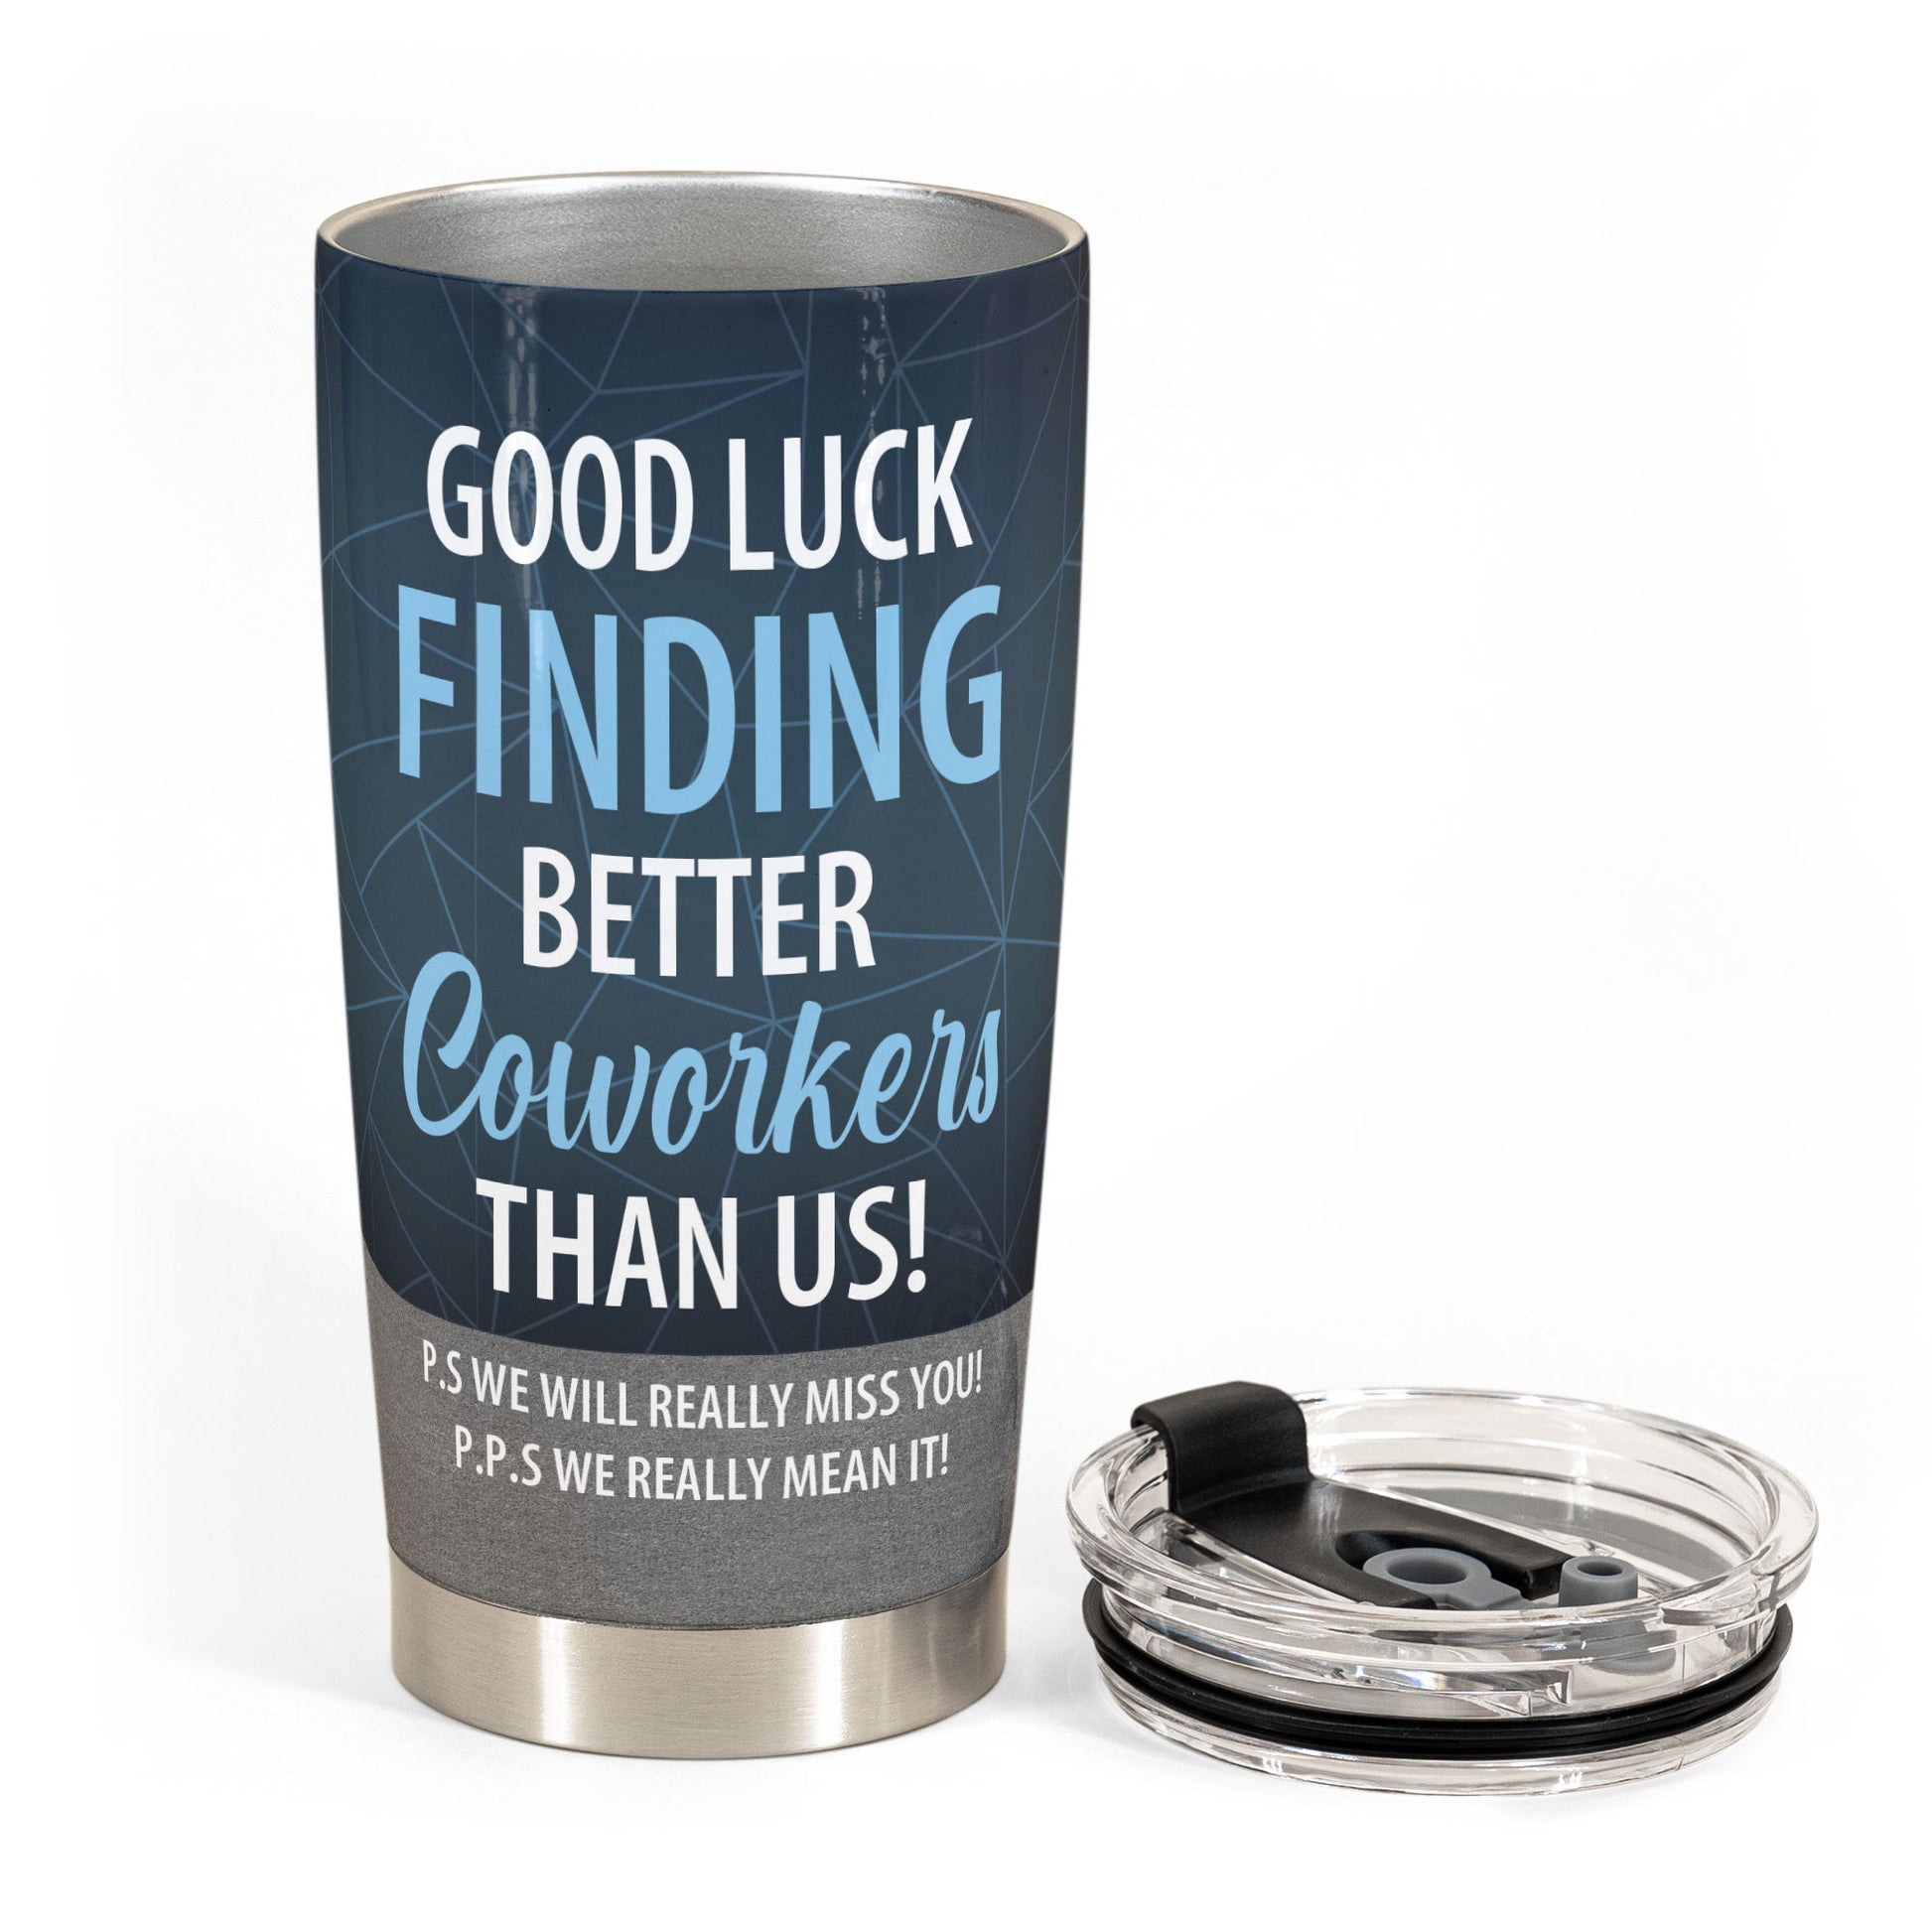 Good Luck Finding Better Friends Than Us - Insulated Coffee Tumbler Cu -  bevvee